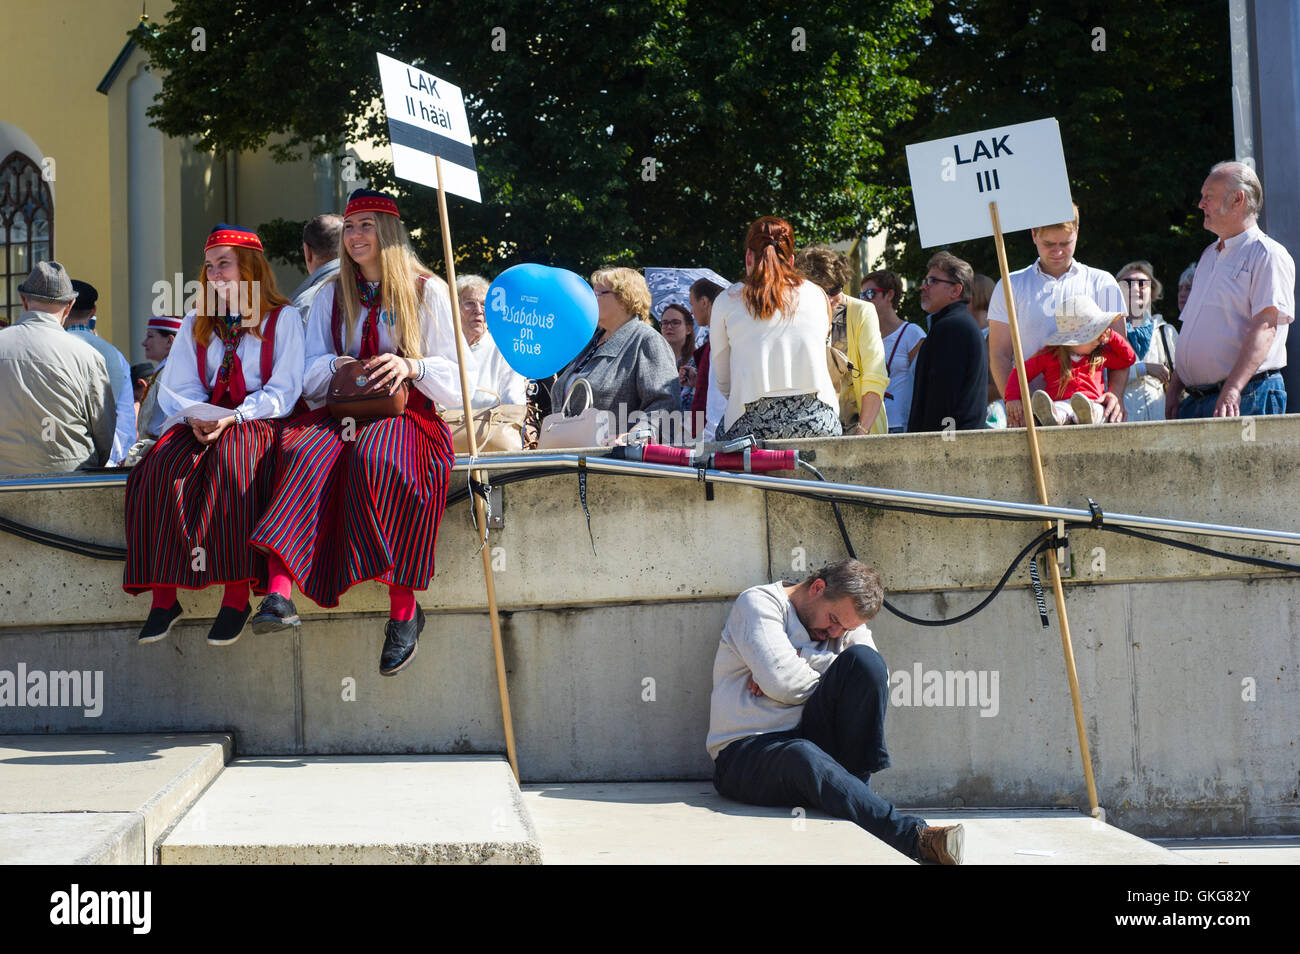 Tallinn, Estonia, 20th August 2016. Folkloric group members smile at the Freedom square of Tallinn. On 20th of August the Republic of Estonia celebrates the 25th years since the restoration of Independence after the collapse of the Soviet Union in 1991. Credit:  Nicolas Bouvy/Alamy Live News Stock Photo